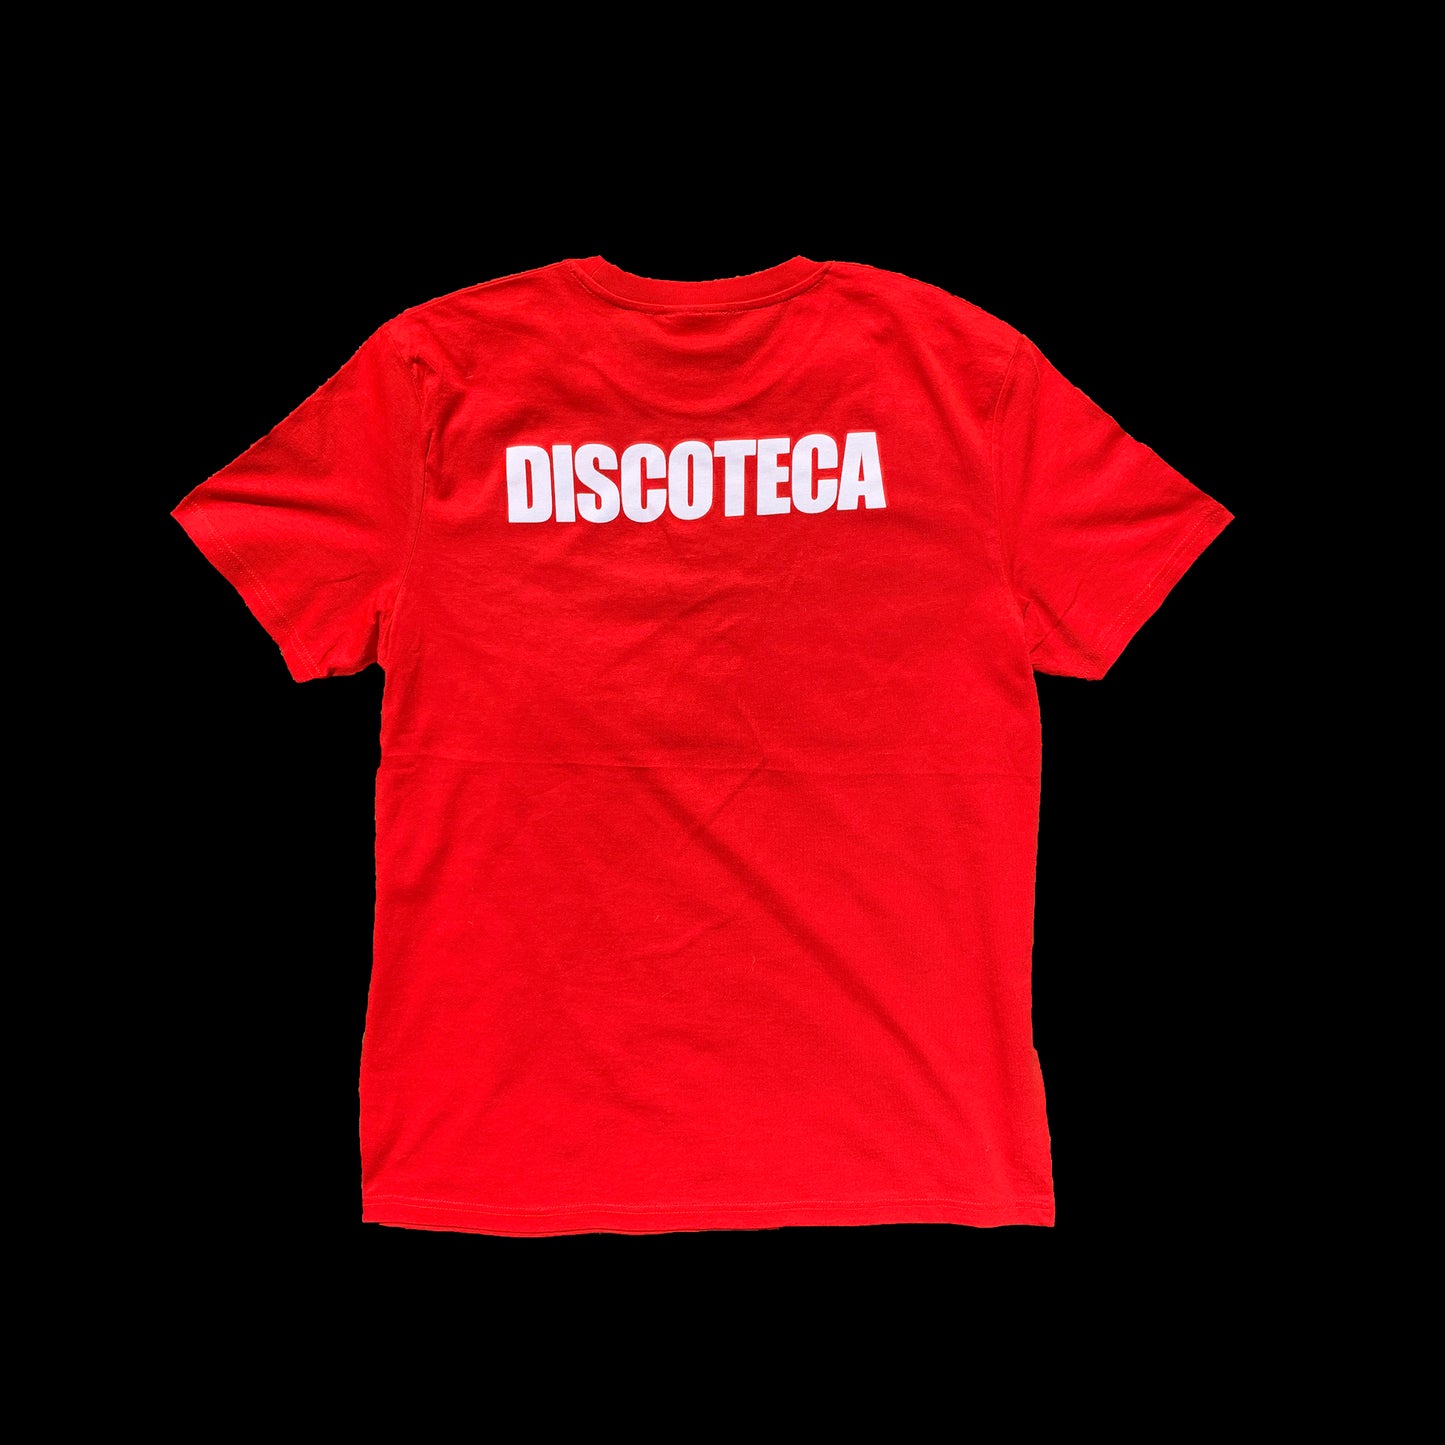 Discoteca T-Shirt - red - Limited to 150